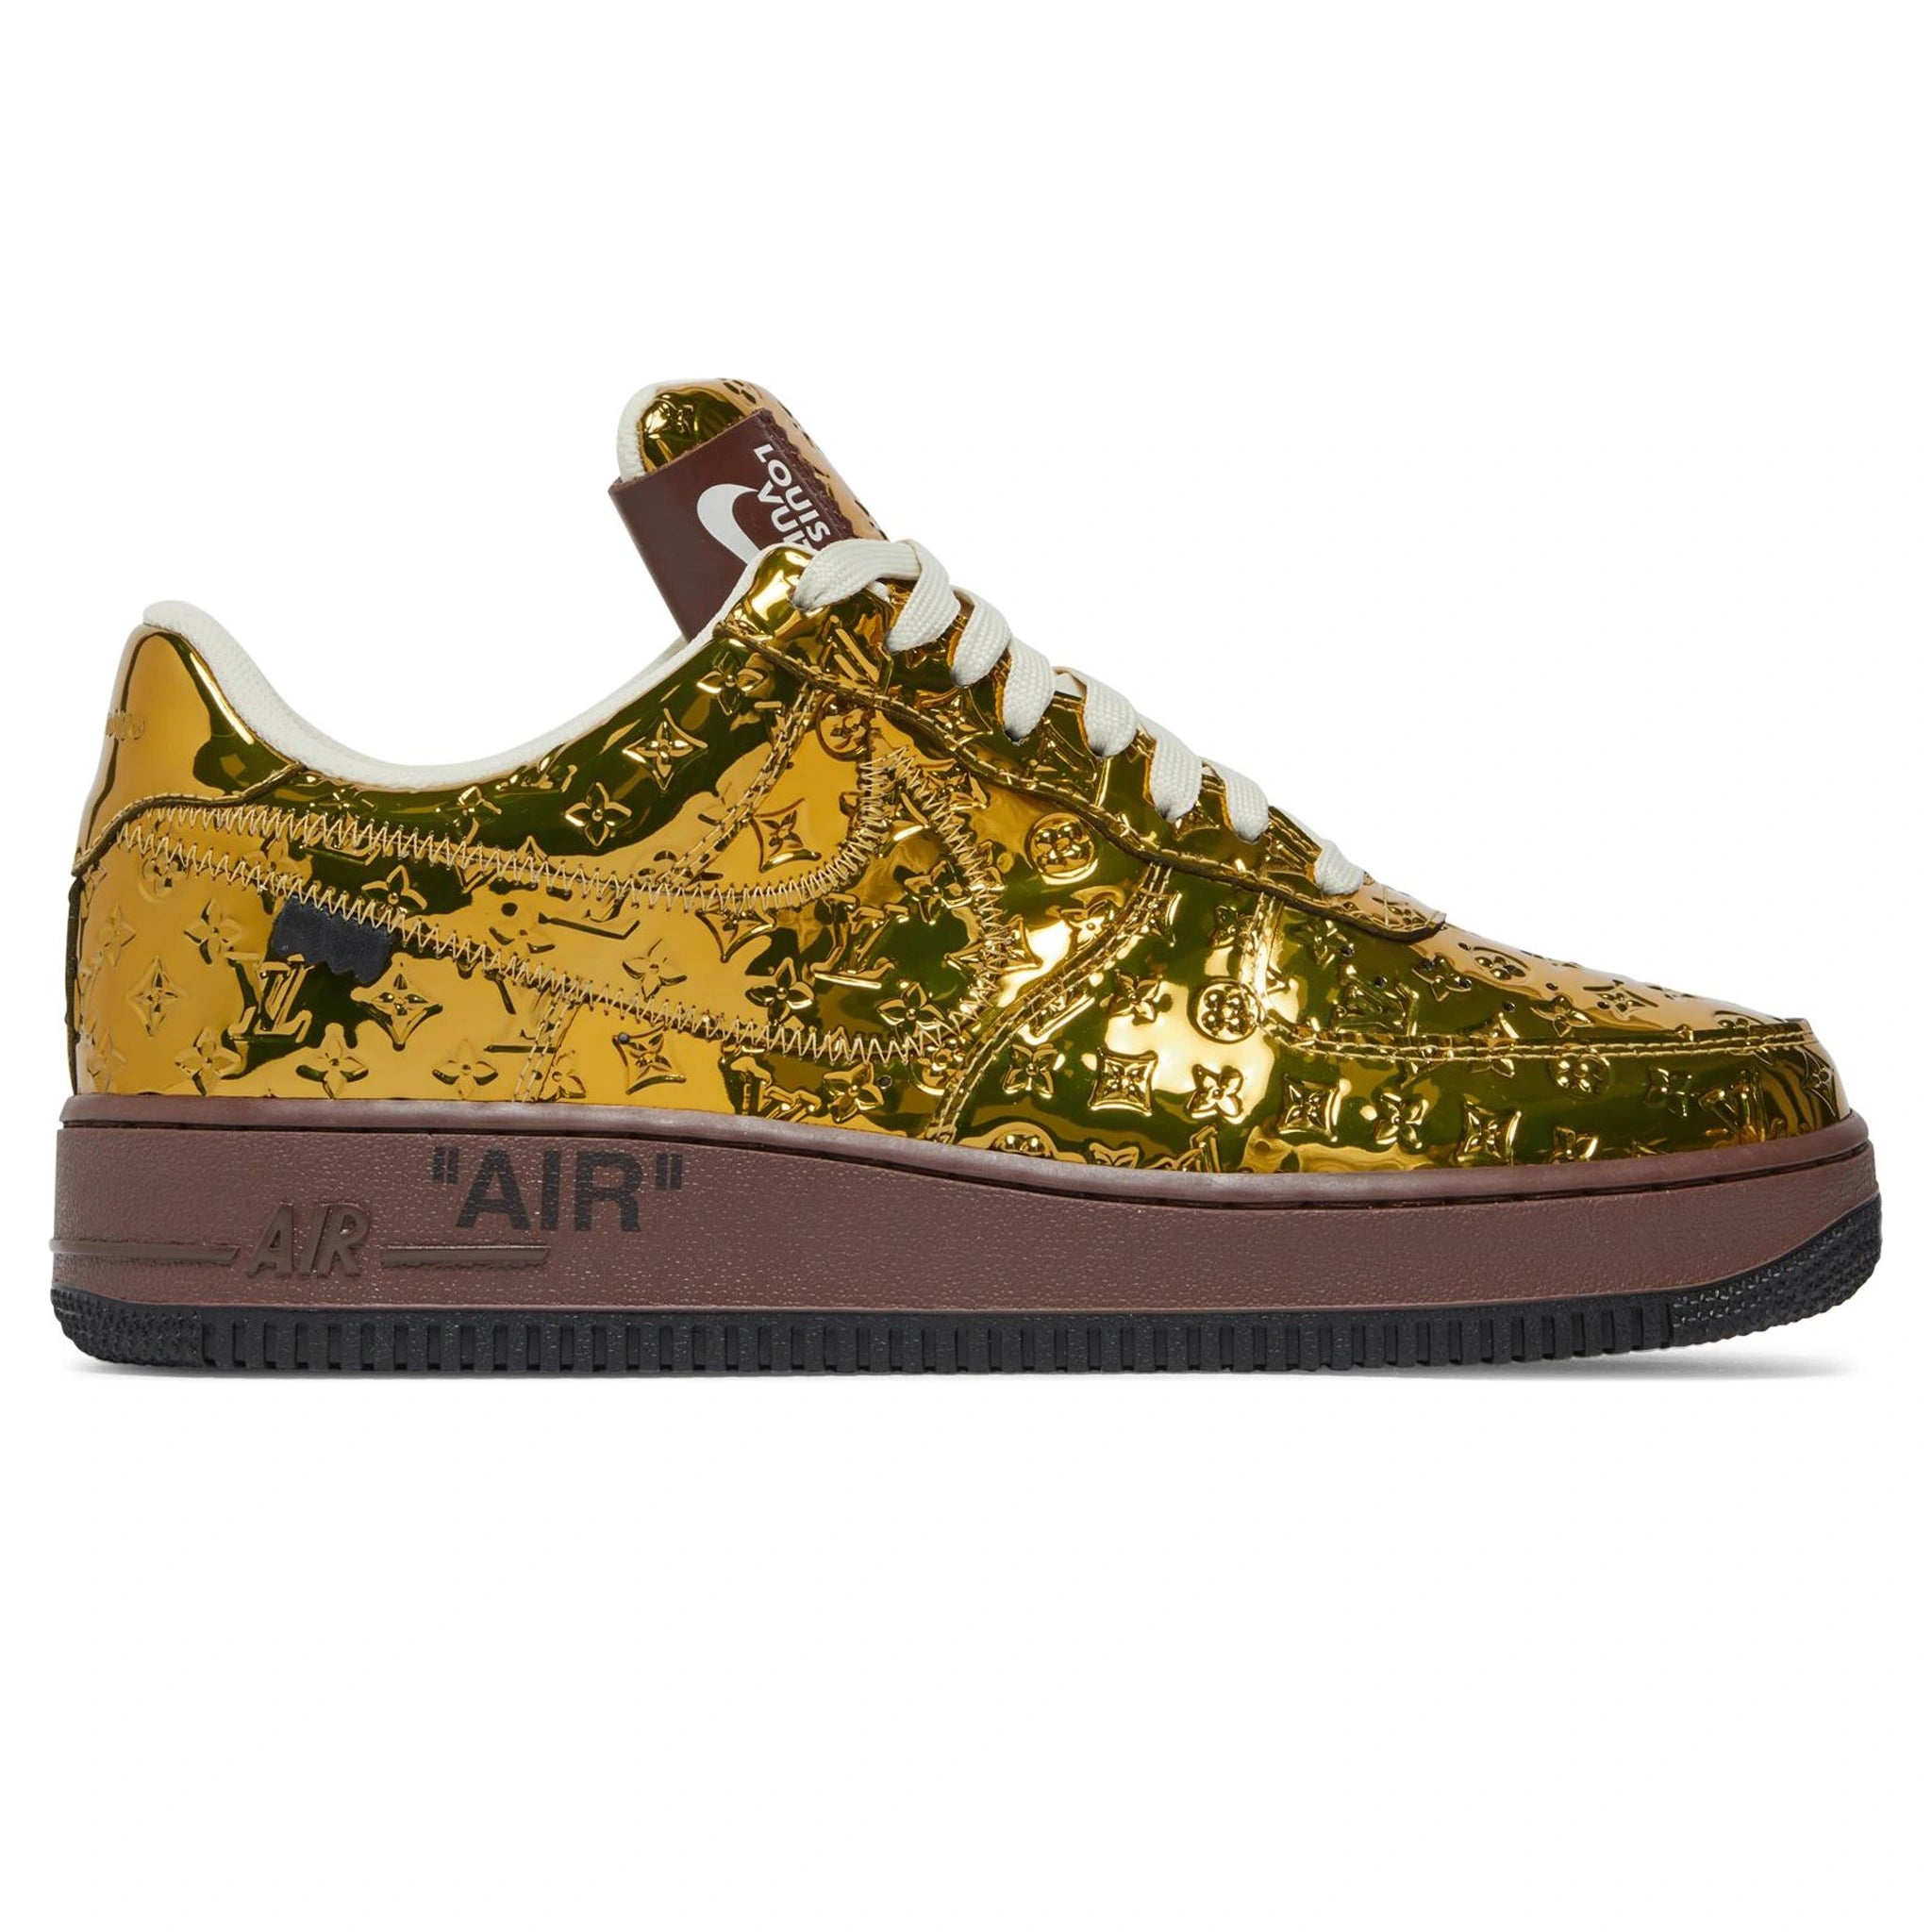 Side view of Louis Vuitton x Nike Air Force 1 Low Metallic Gold 1A9VG1